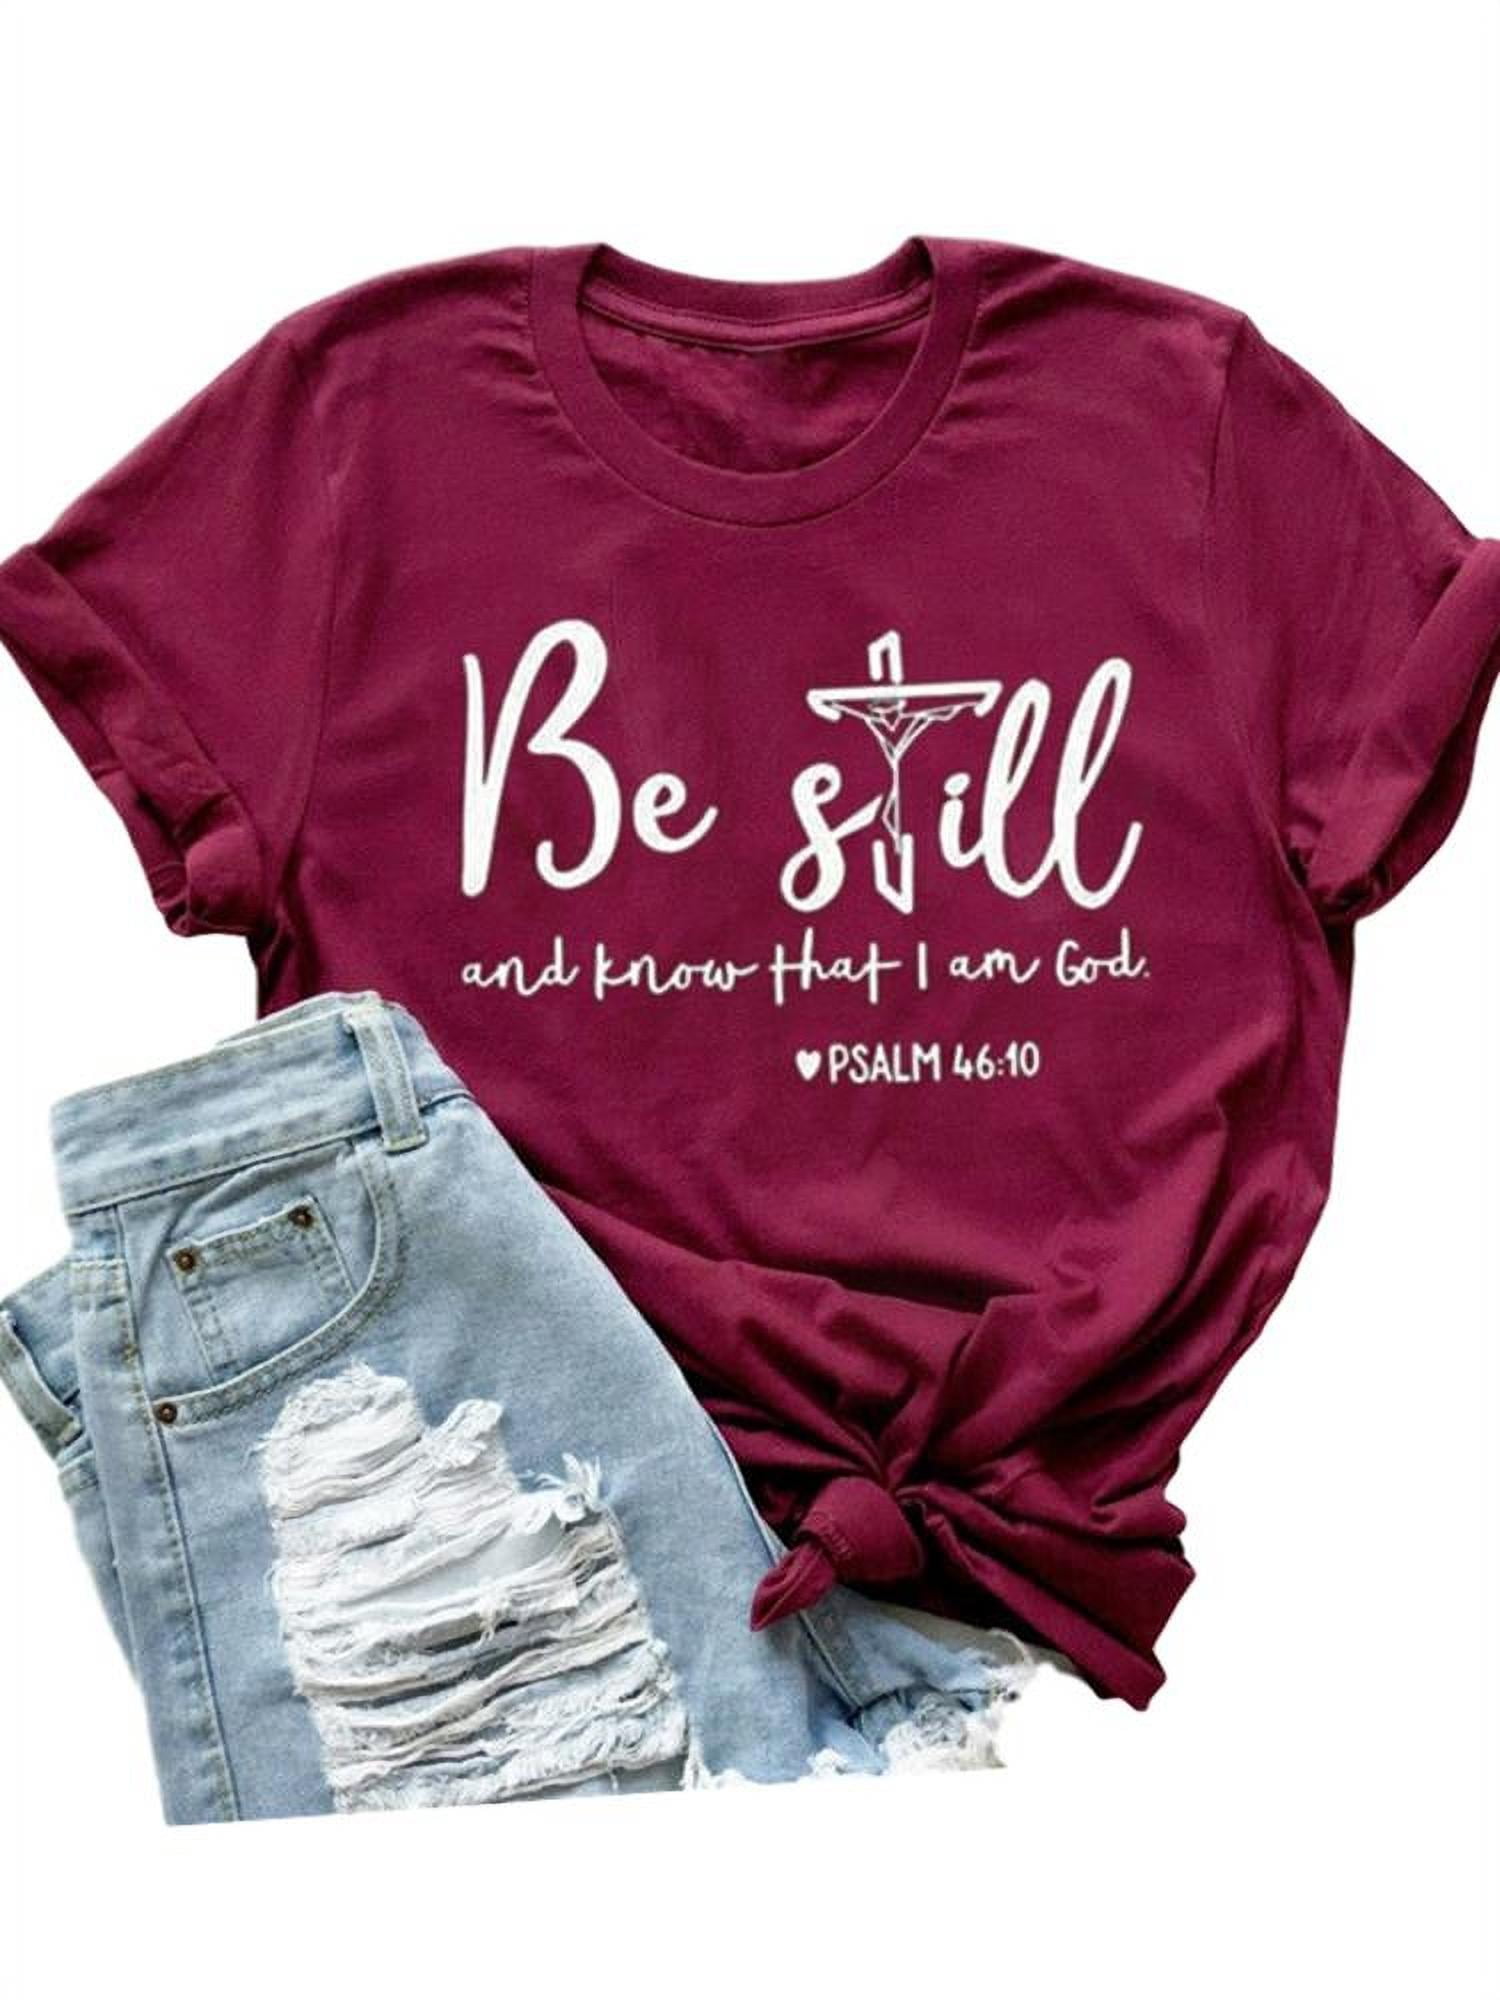 Girl believes in God Tshirt Women Believe in God Graphic Tee Just A Girl Who Believes In God T-Shirt God and Girl Art Design for Girls